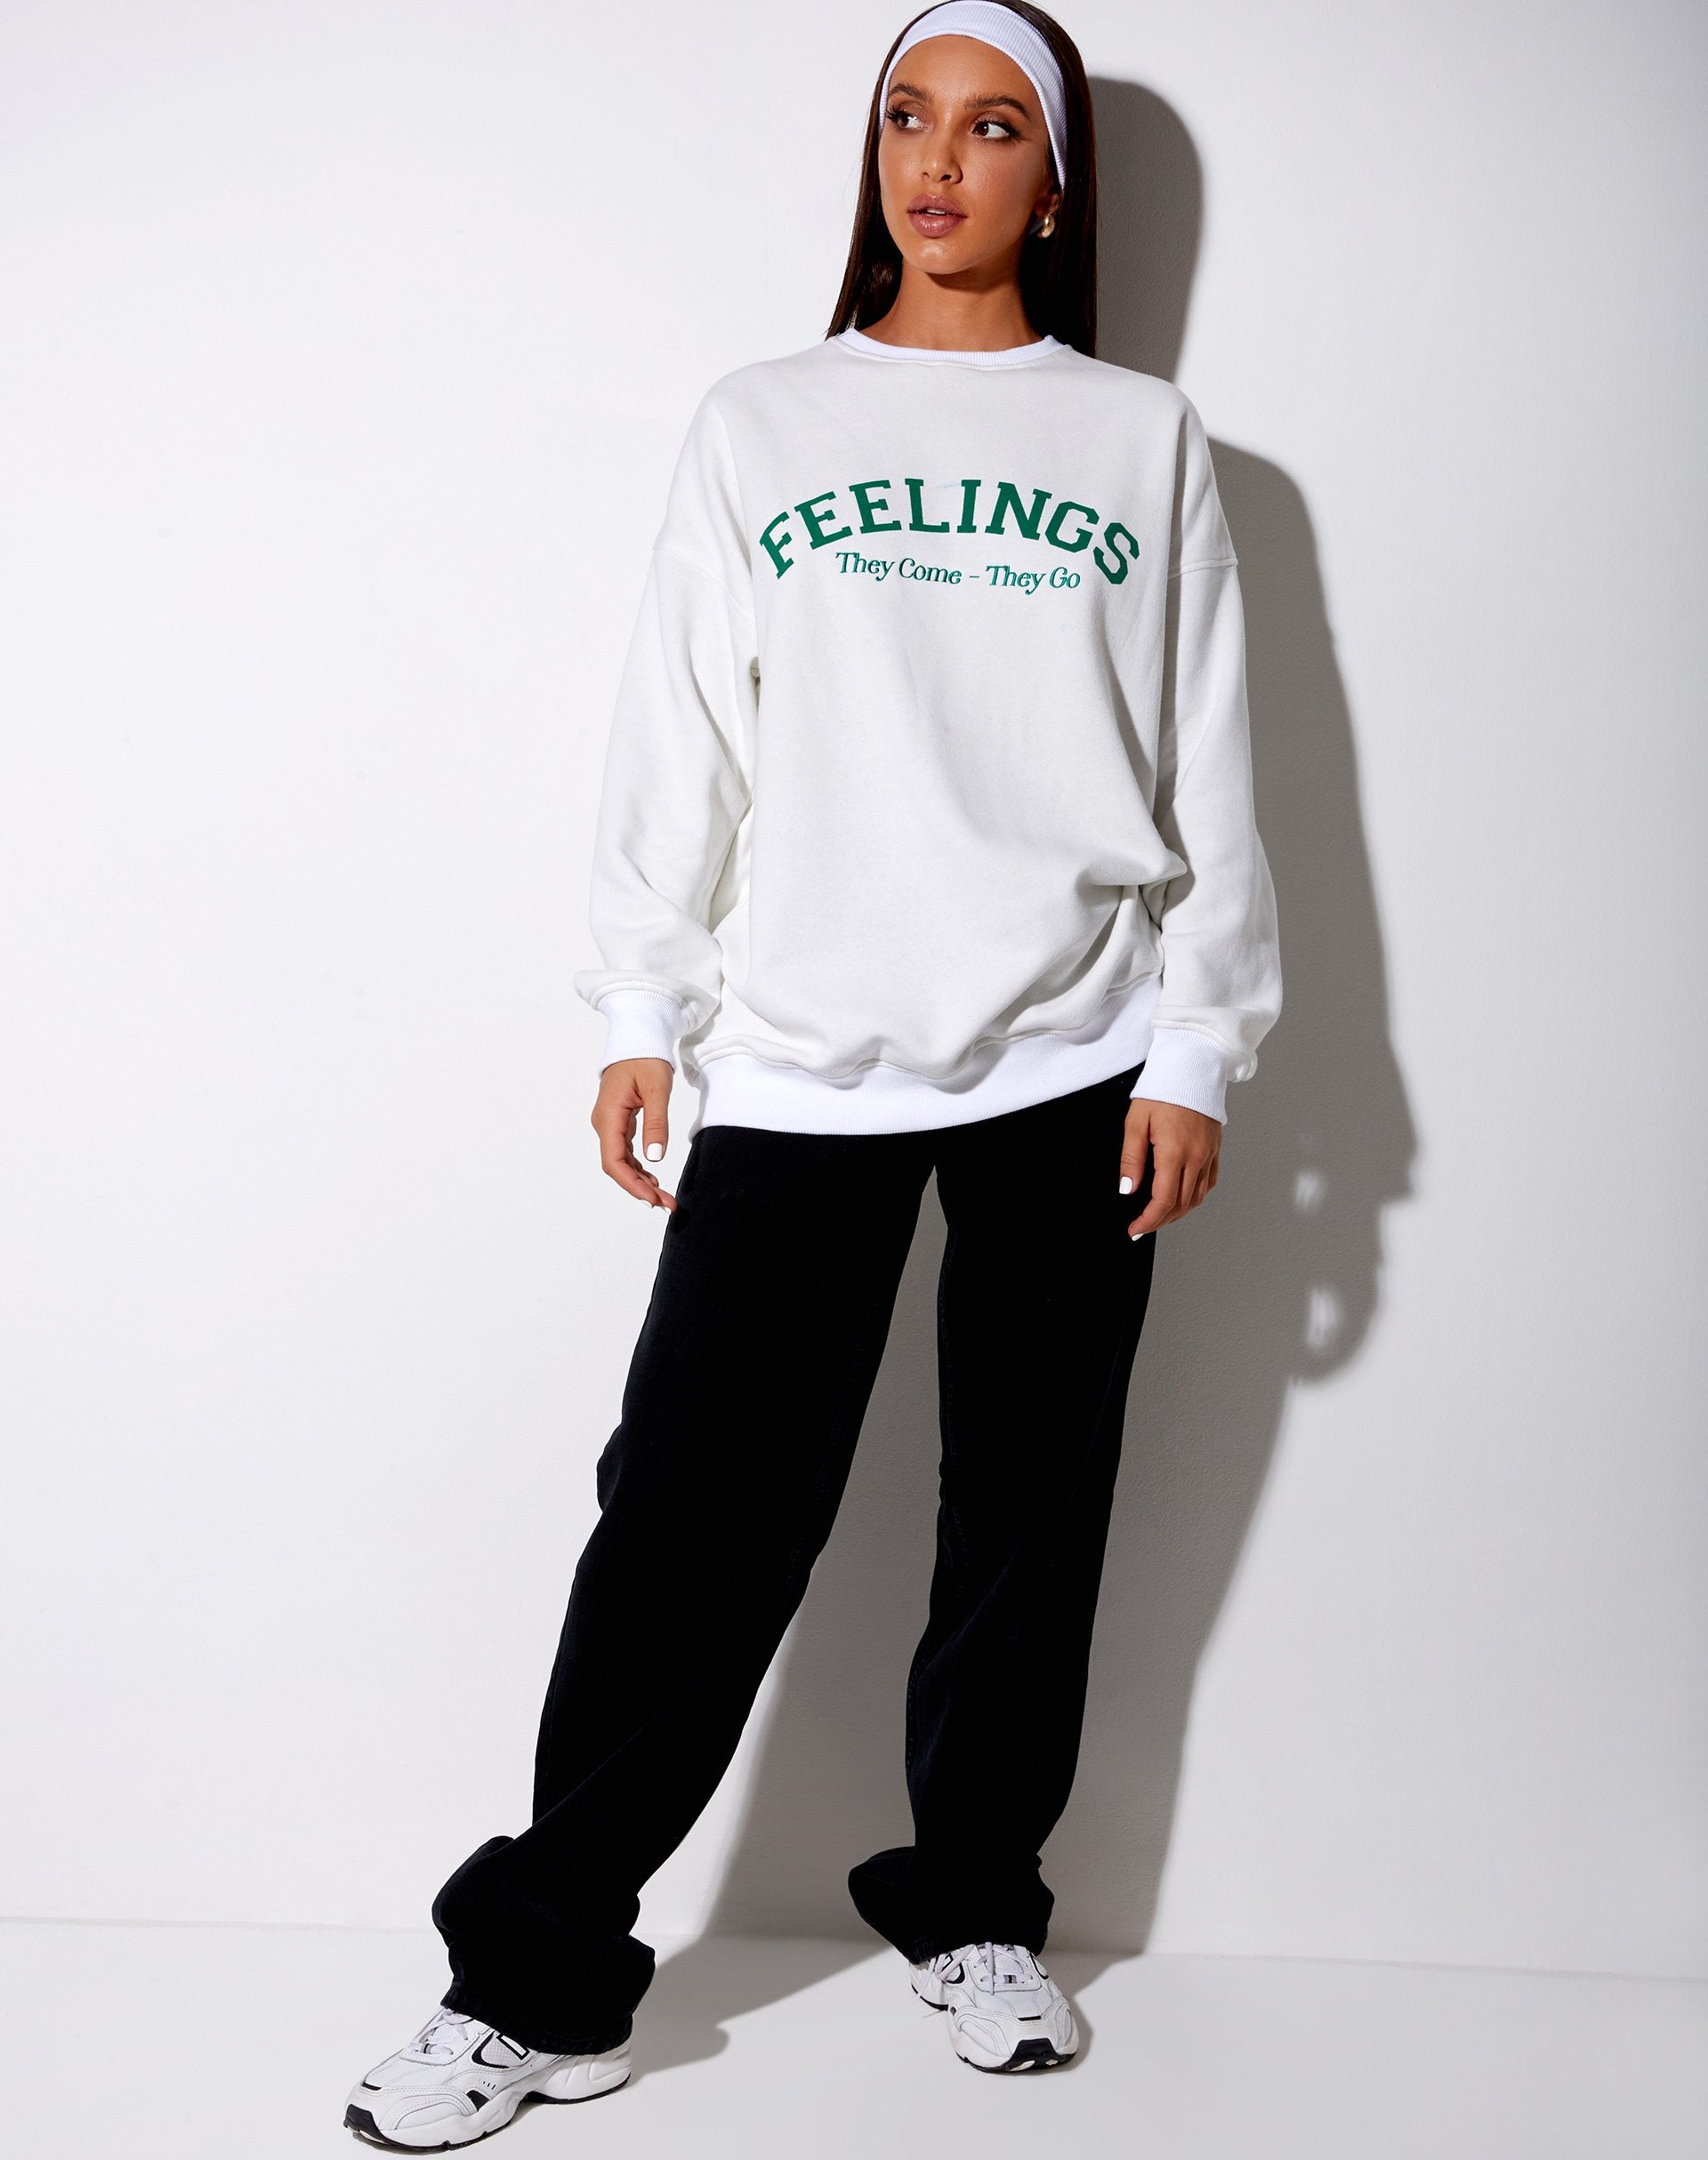 Image of Glo Sweatshirt in White Feelings They Come They Go